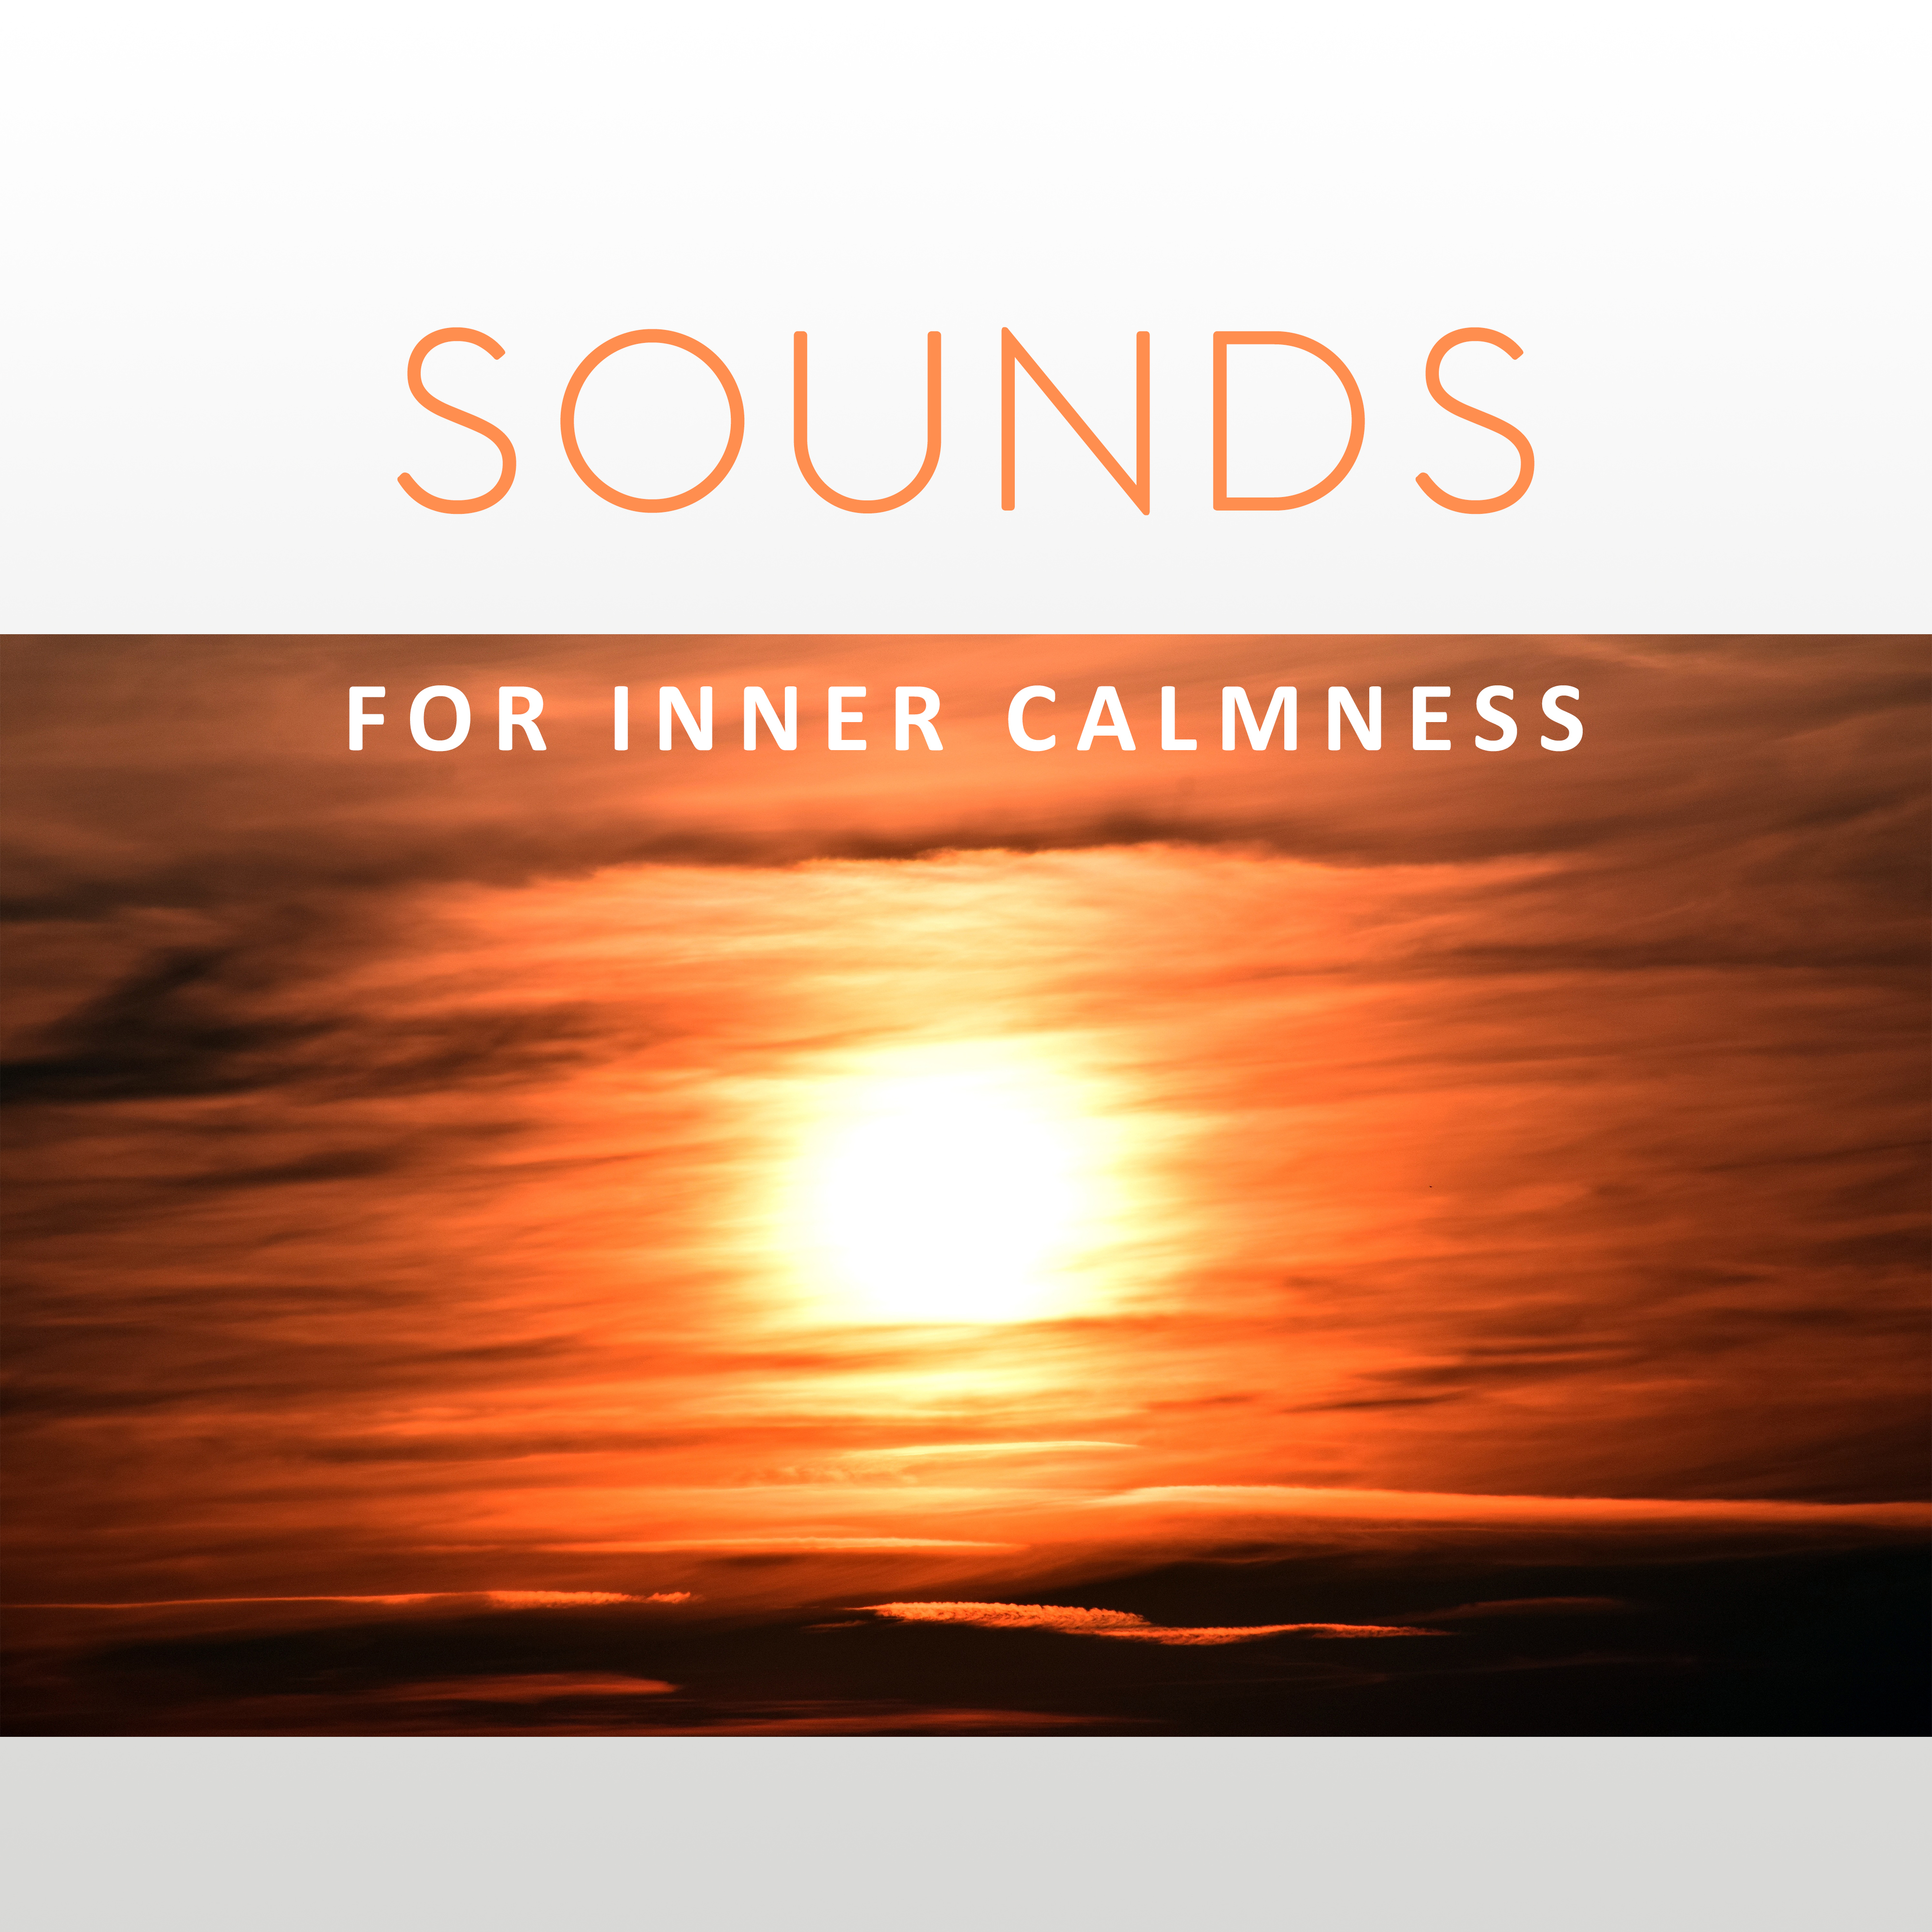 Sounds for Inner Calmness  Stress Relief, Peaceful Music, New Age Relaxation, Peaceful Night Waves